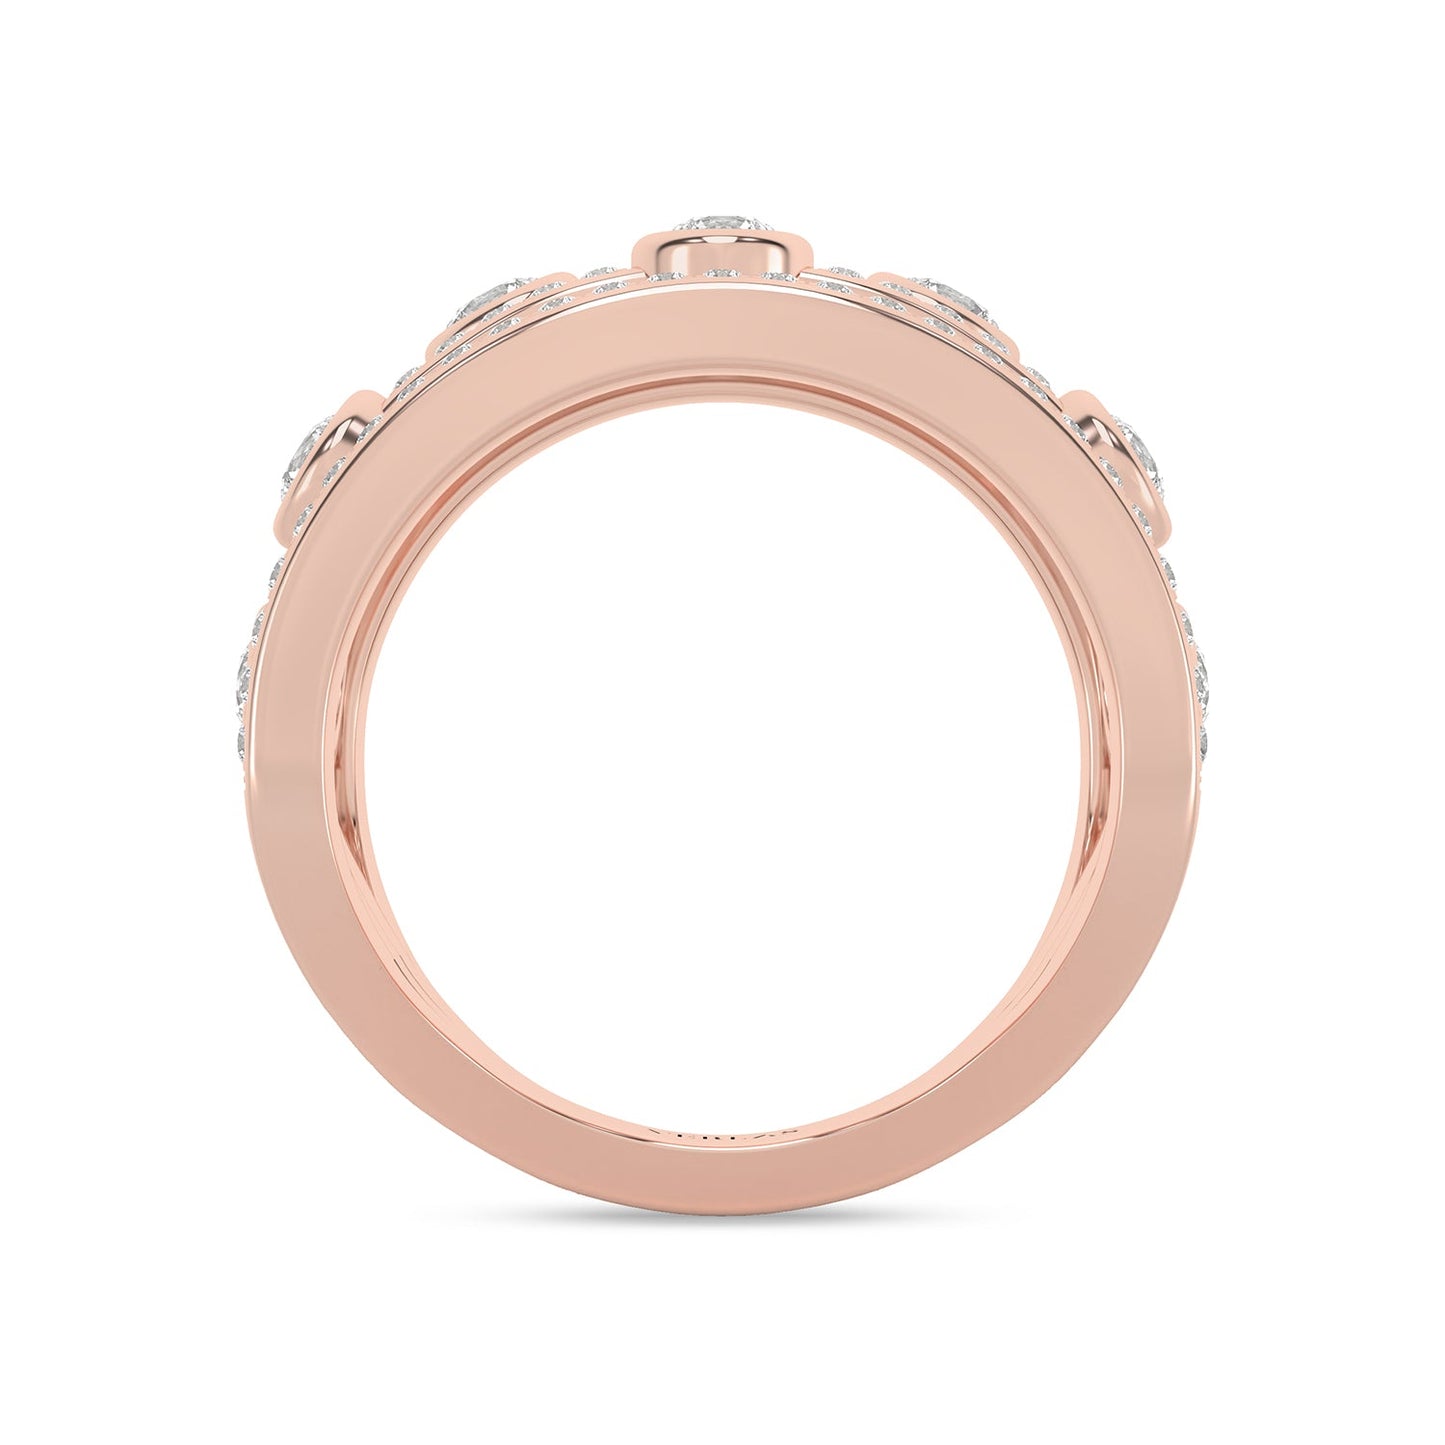 2x2 Tier Smitten Ring_Product Angle_1 Ct. - 3